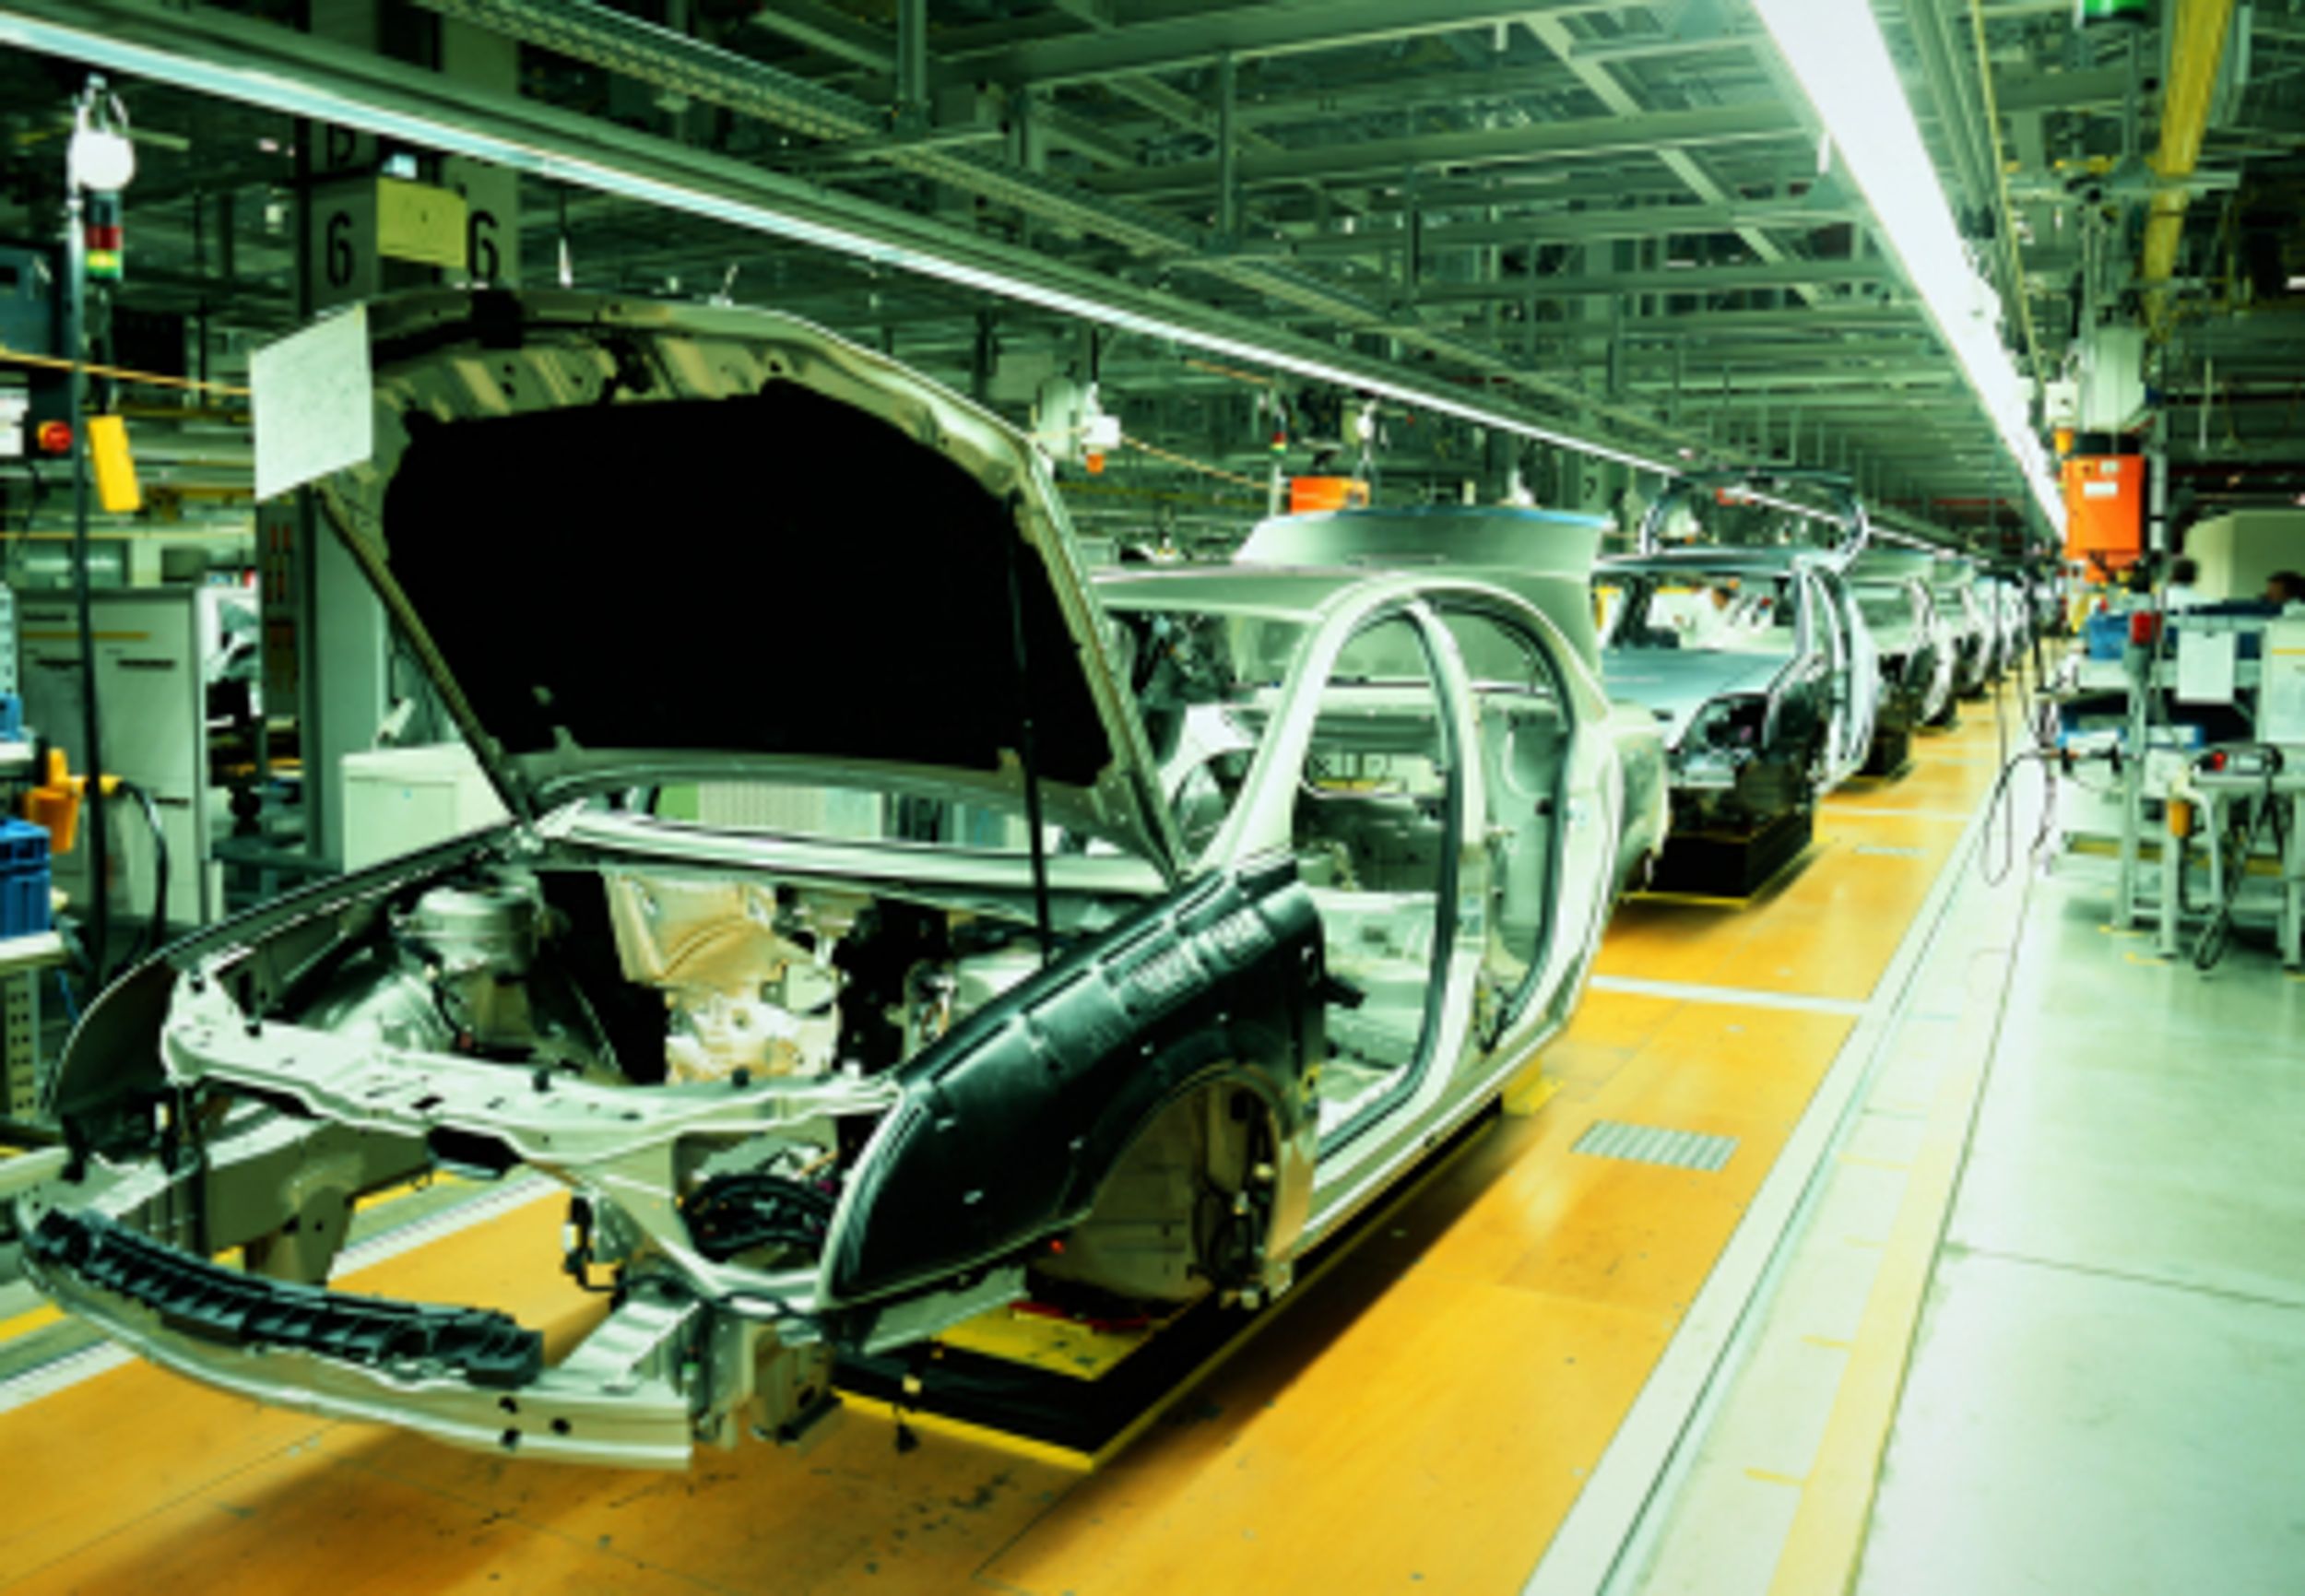 Strong Automotive Industry Fueling Logistics Growth in Mexico